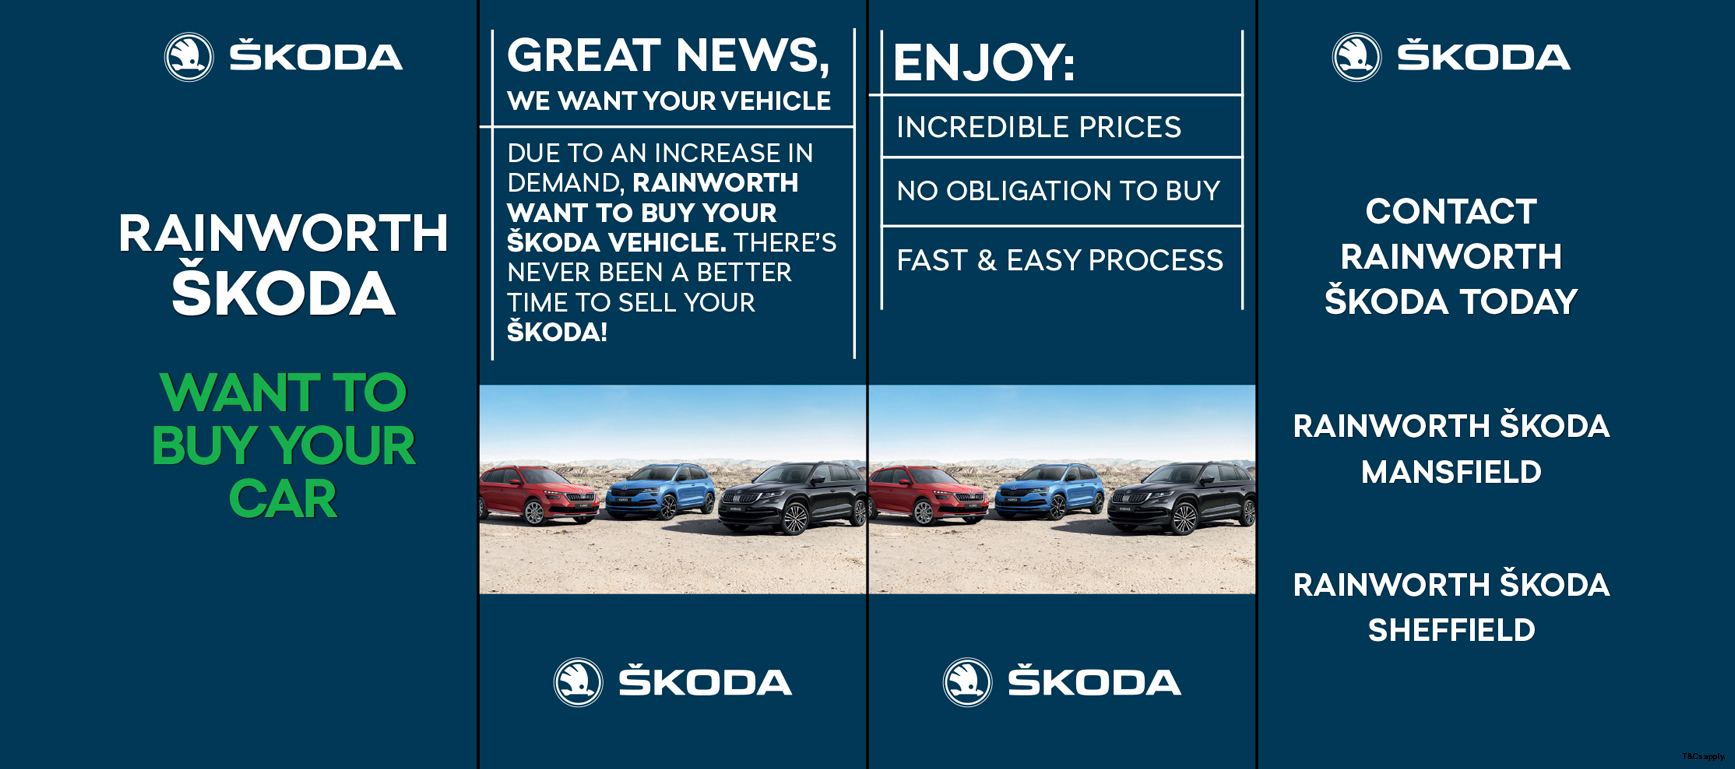 GREAT NEWS - WE WANT YOUR USED SKODA!